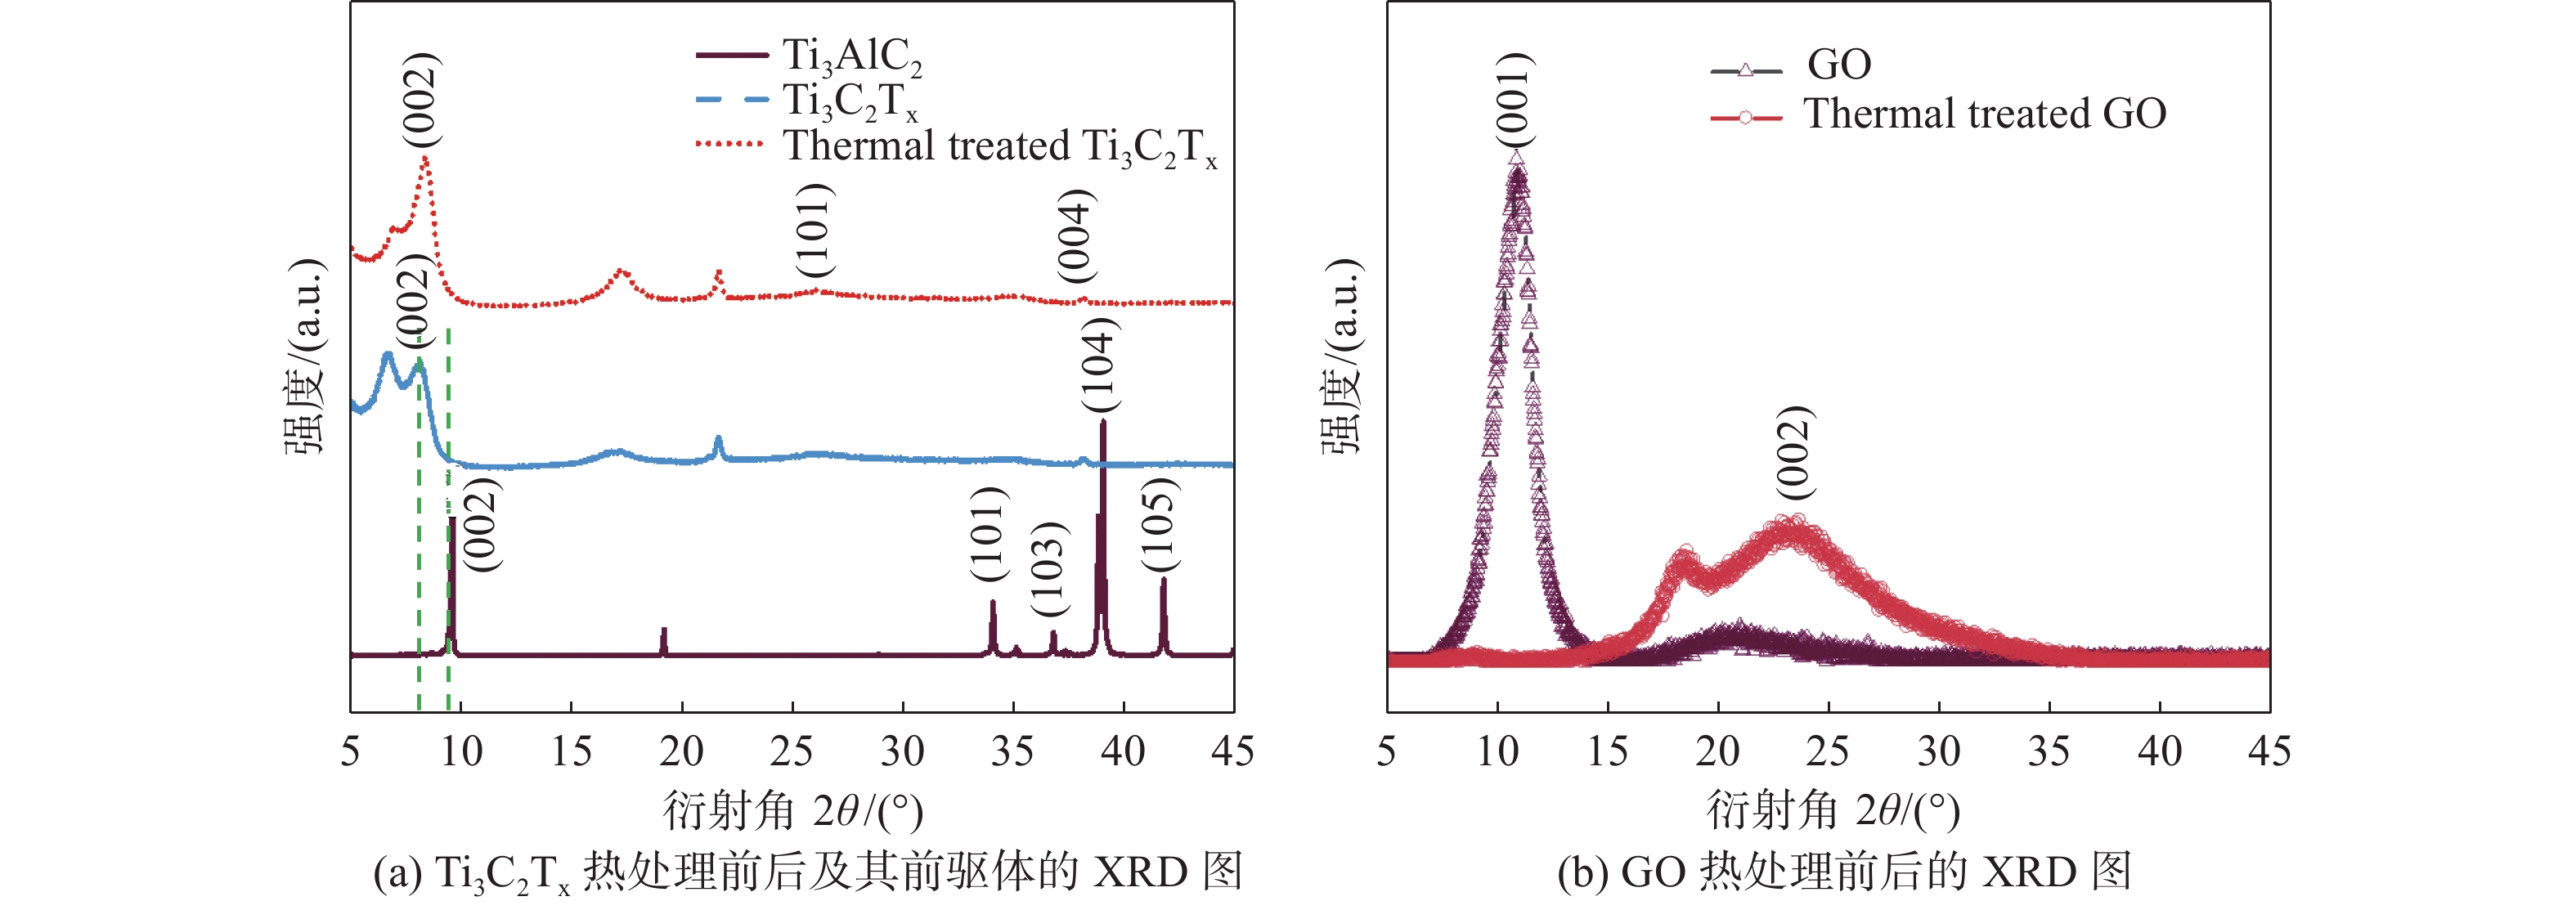 XRD patterns of Ti3C2Tx and GO thin films